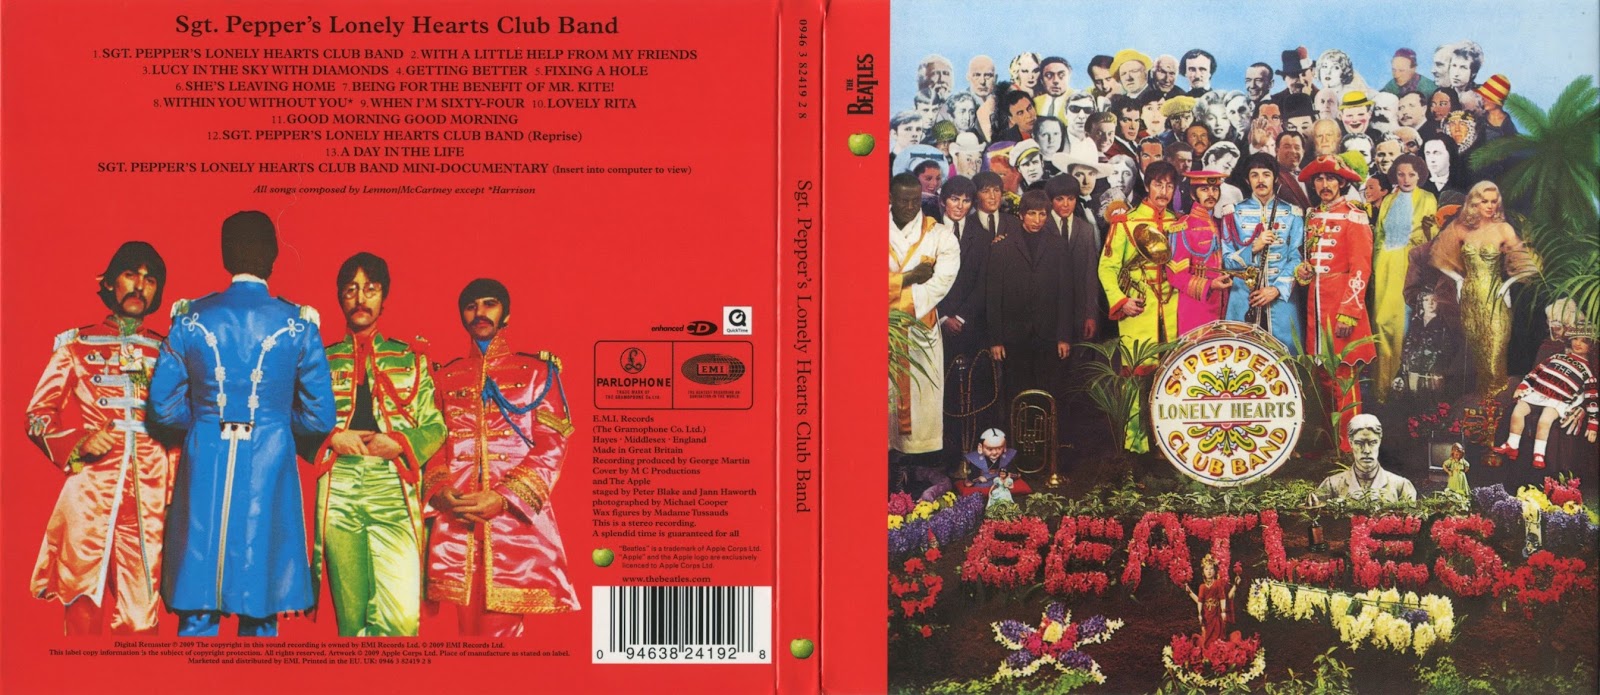 Beatles sgt pepper lonely. The Beatles Sgt. Pepper's Lonely Hearts Club Band 1967. The Beatles Sgt. Pepper's Lonely Hearts Club Band обложка CD. Sgt Pepper s Lonely Hearts Club Band. Битлз Sgt Pepper s Lonely Hearts Club Band.